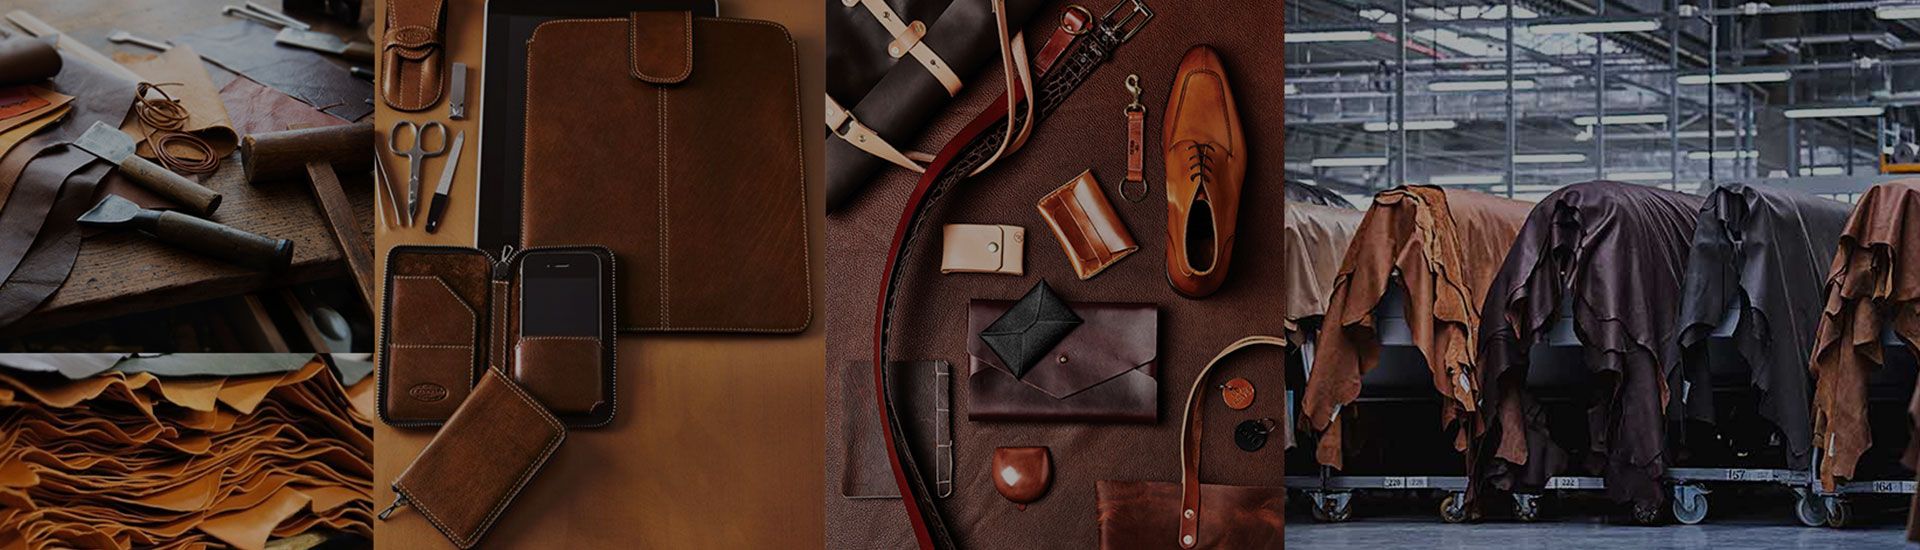 Custom Leather Goods Manufacturer in India | Industry Experts